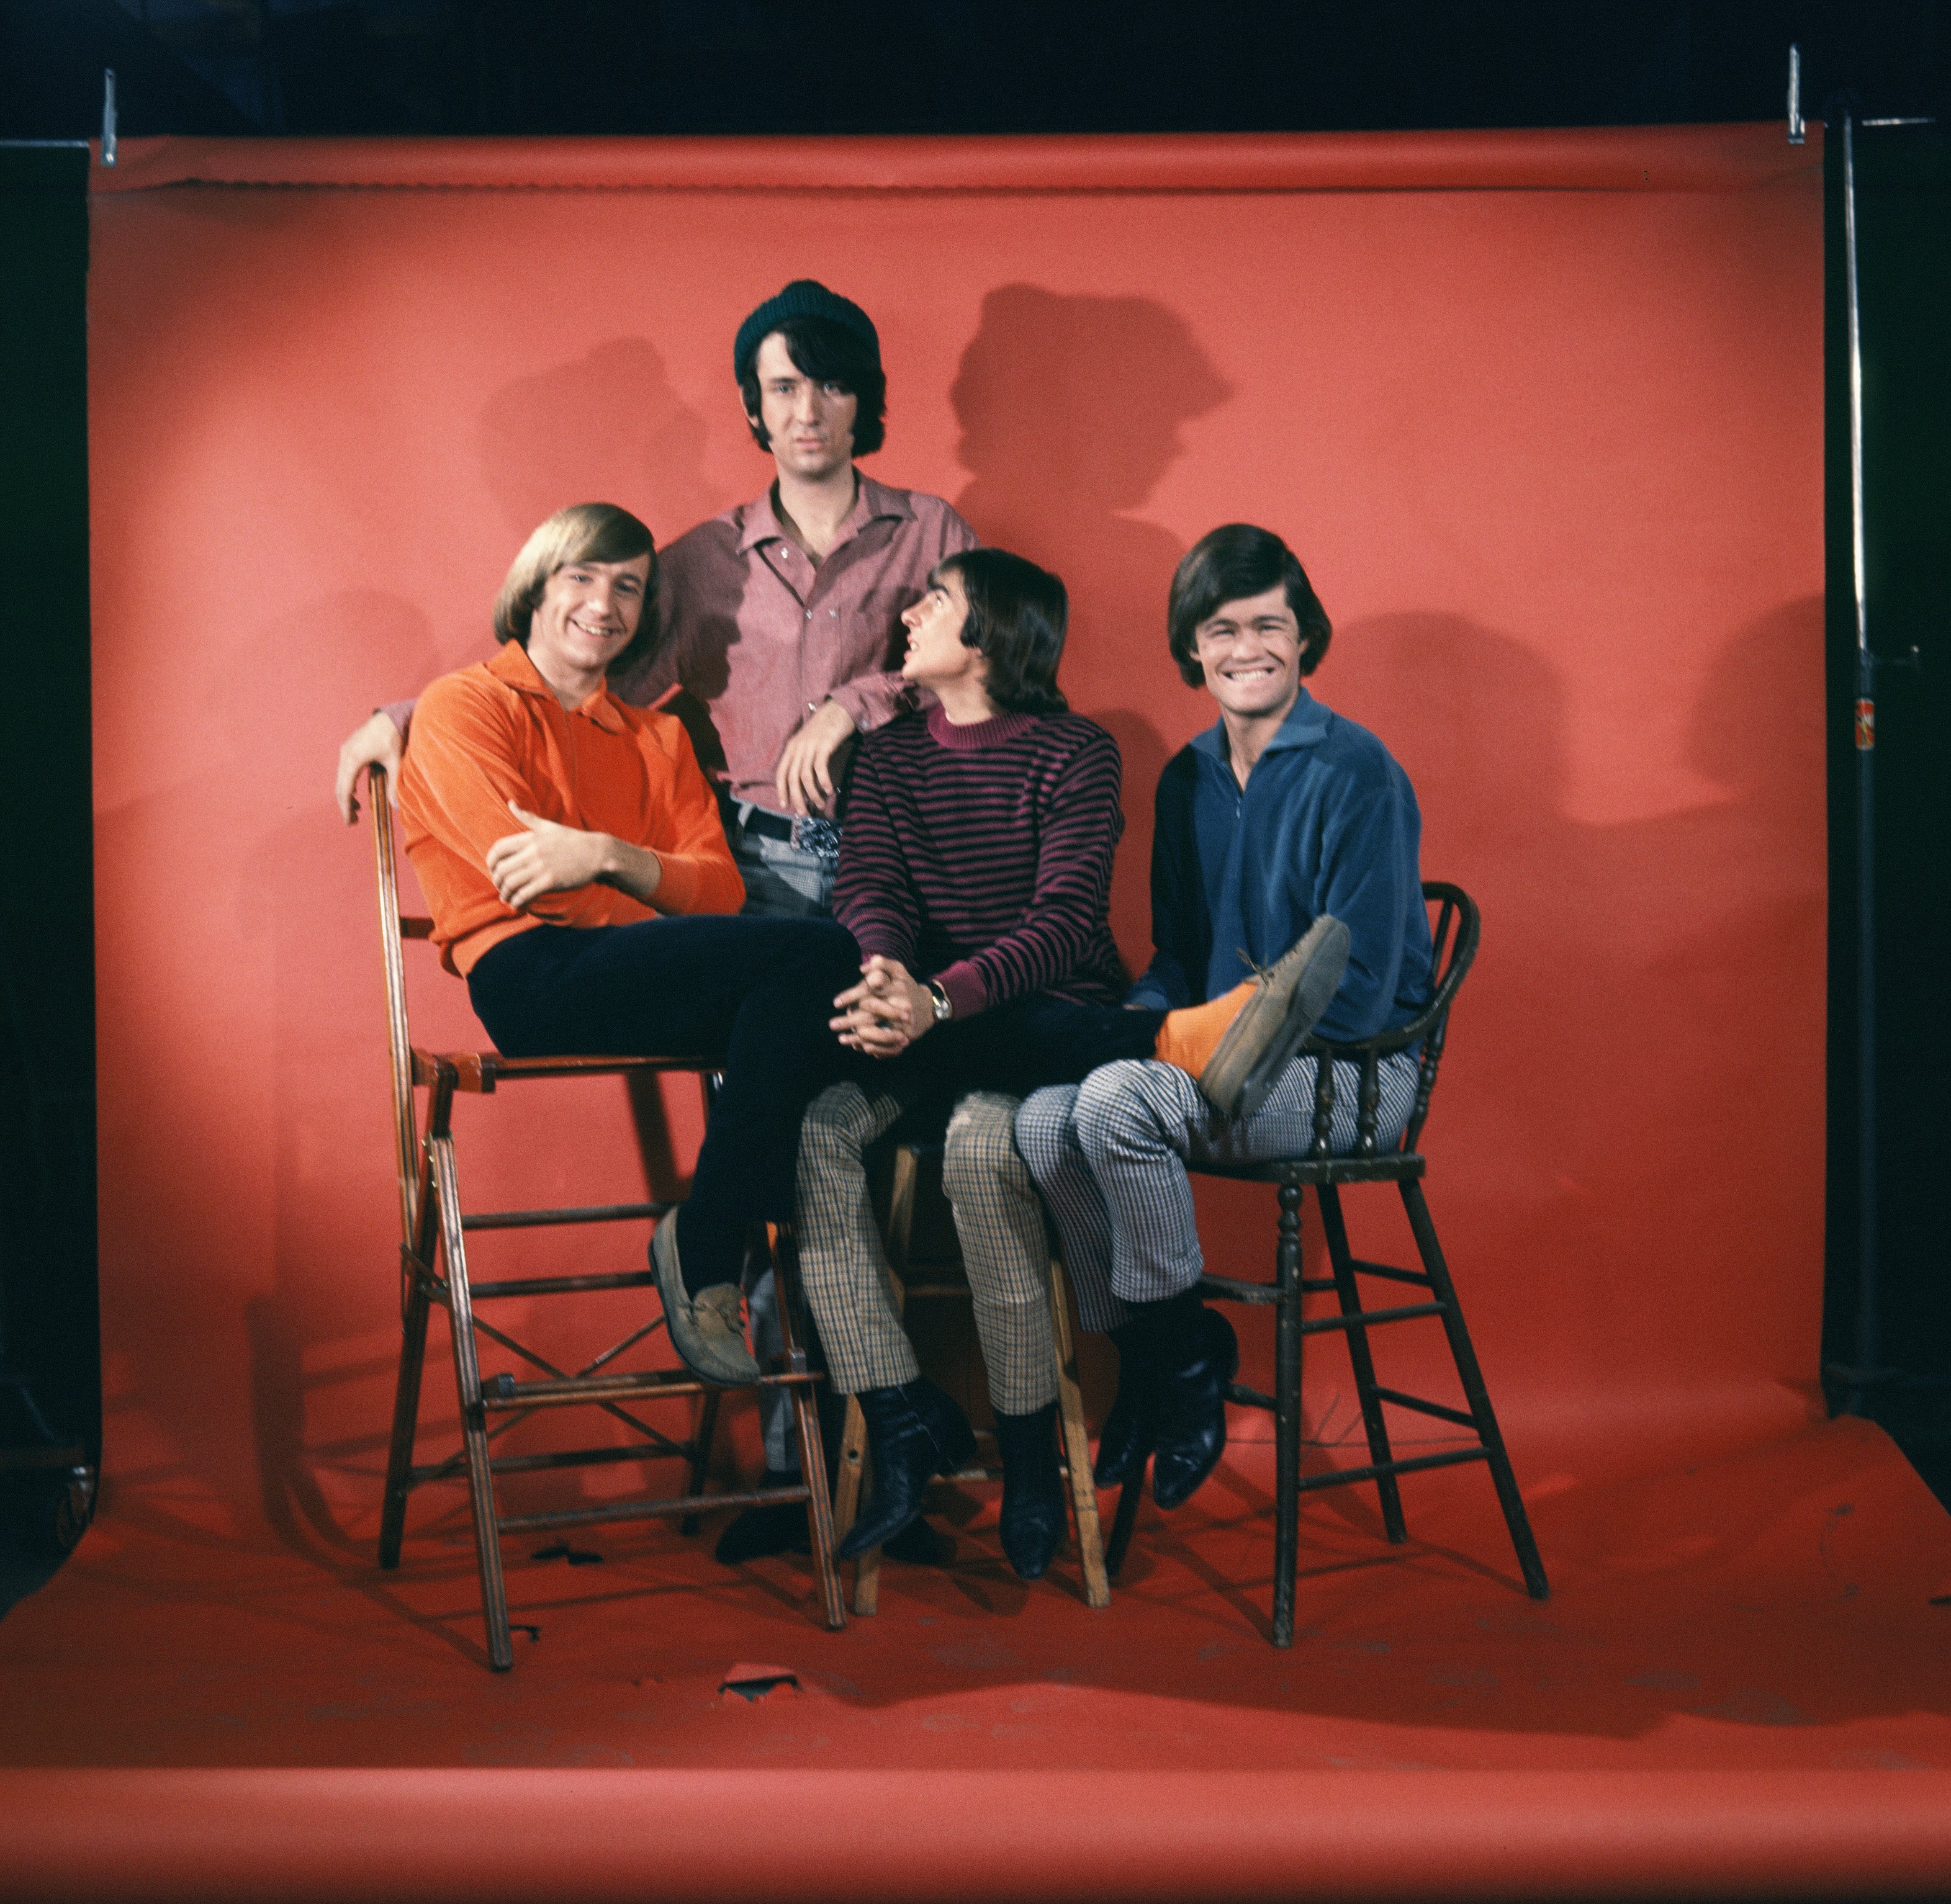 The Monkees in front of a red backdrop